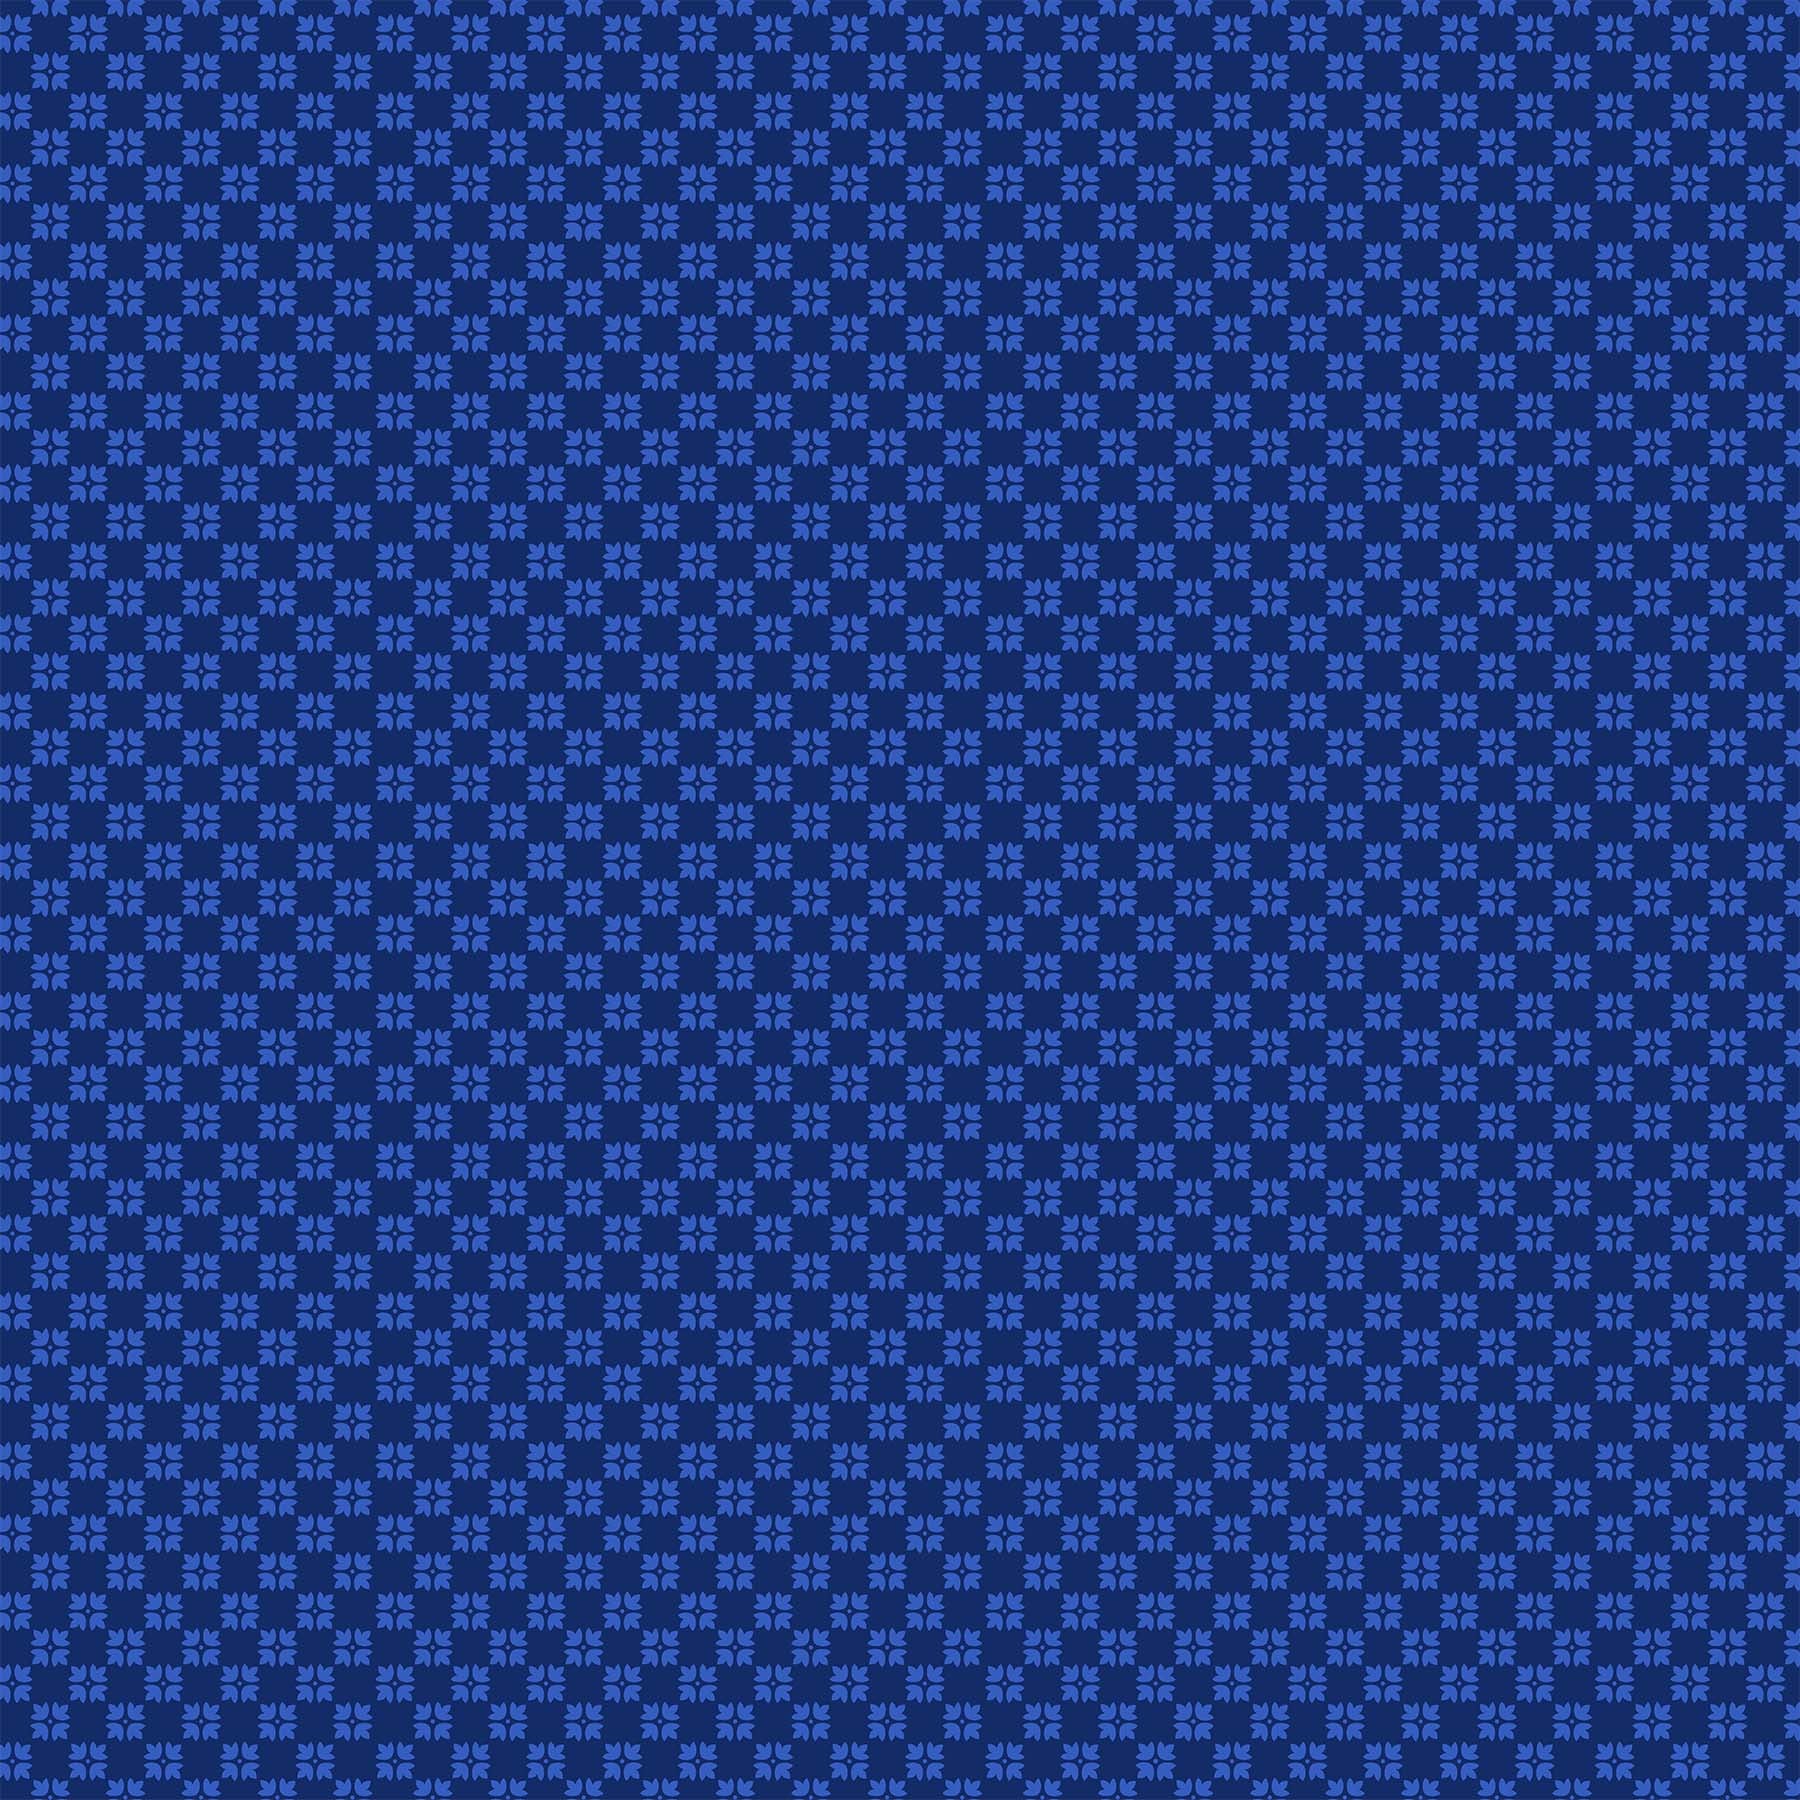 Hampton Court Quilt Fabric - Patterned Check in Navy Blue - 90591-42